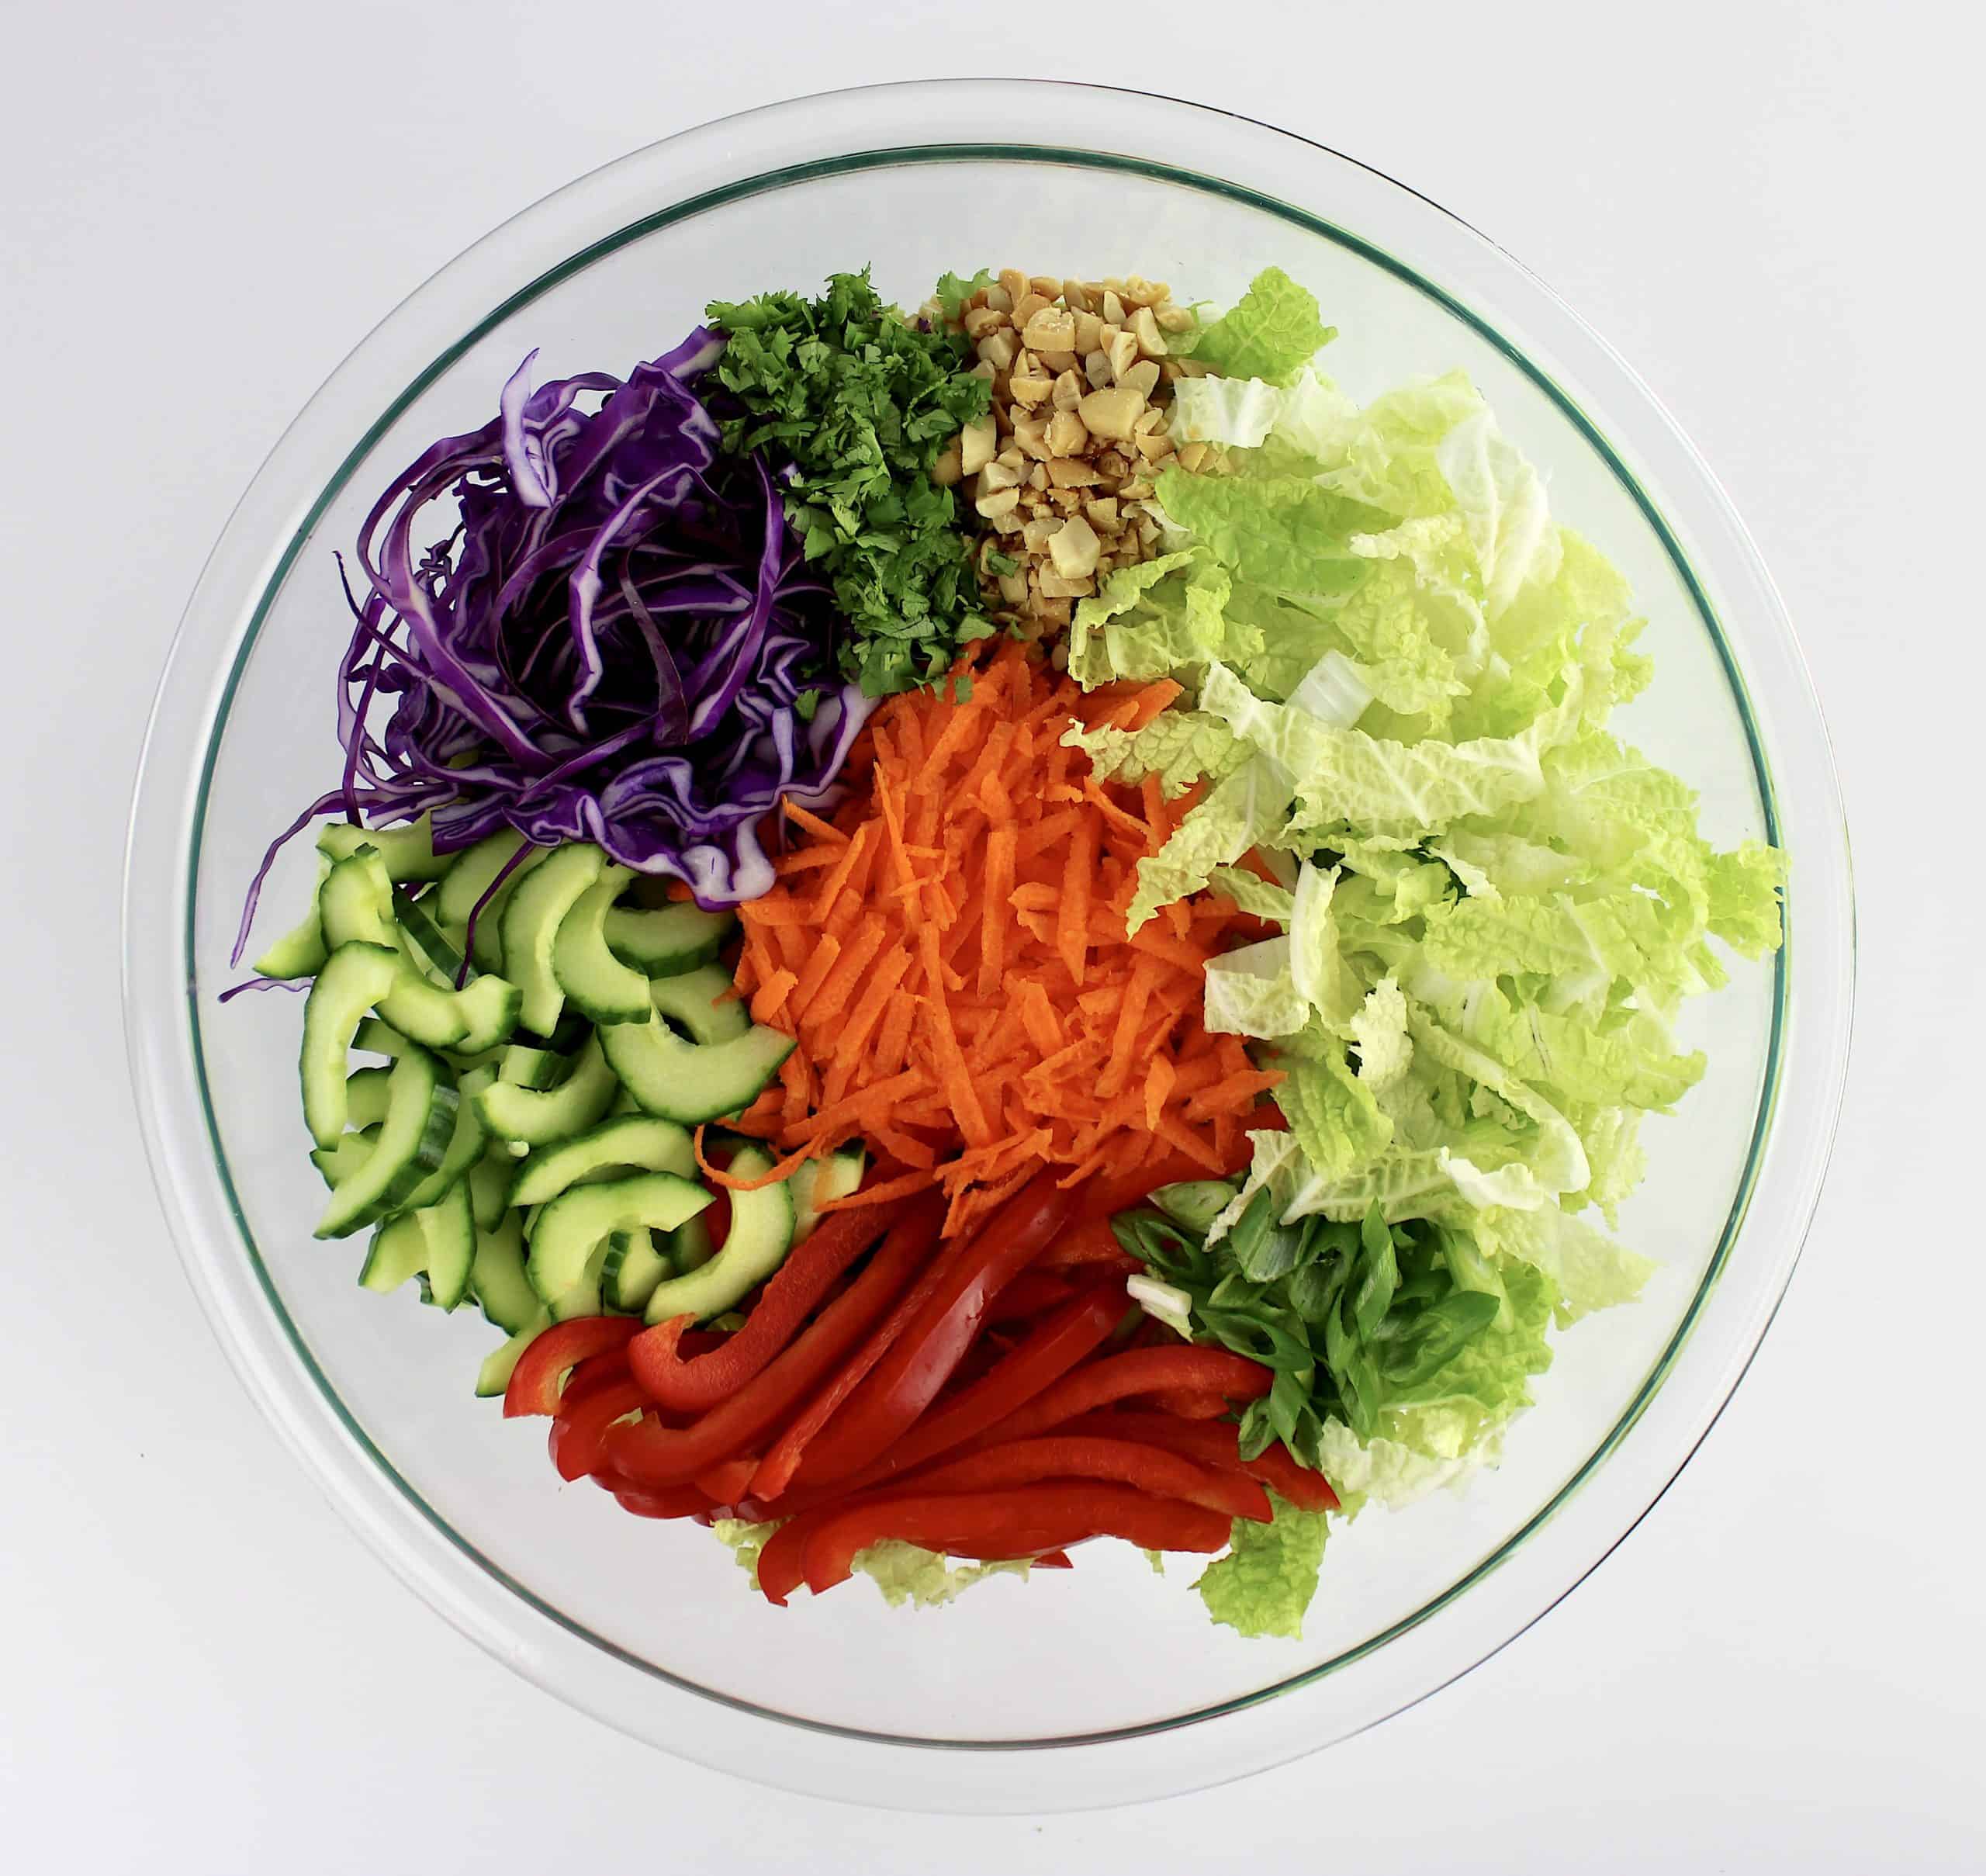 cabbage red bell pepper cucumbers peanuts scallions and carrots all shredded in glass bowl